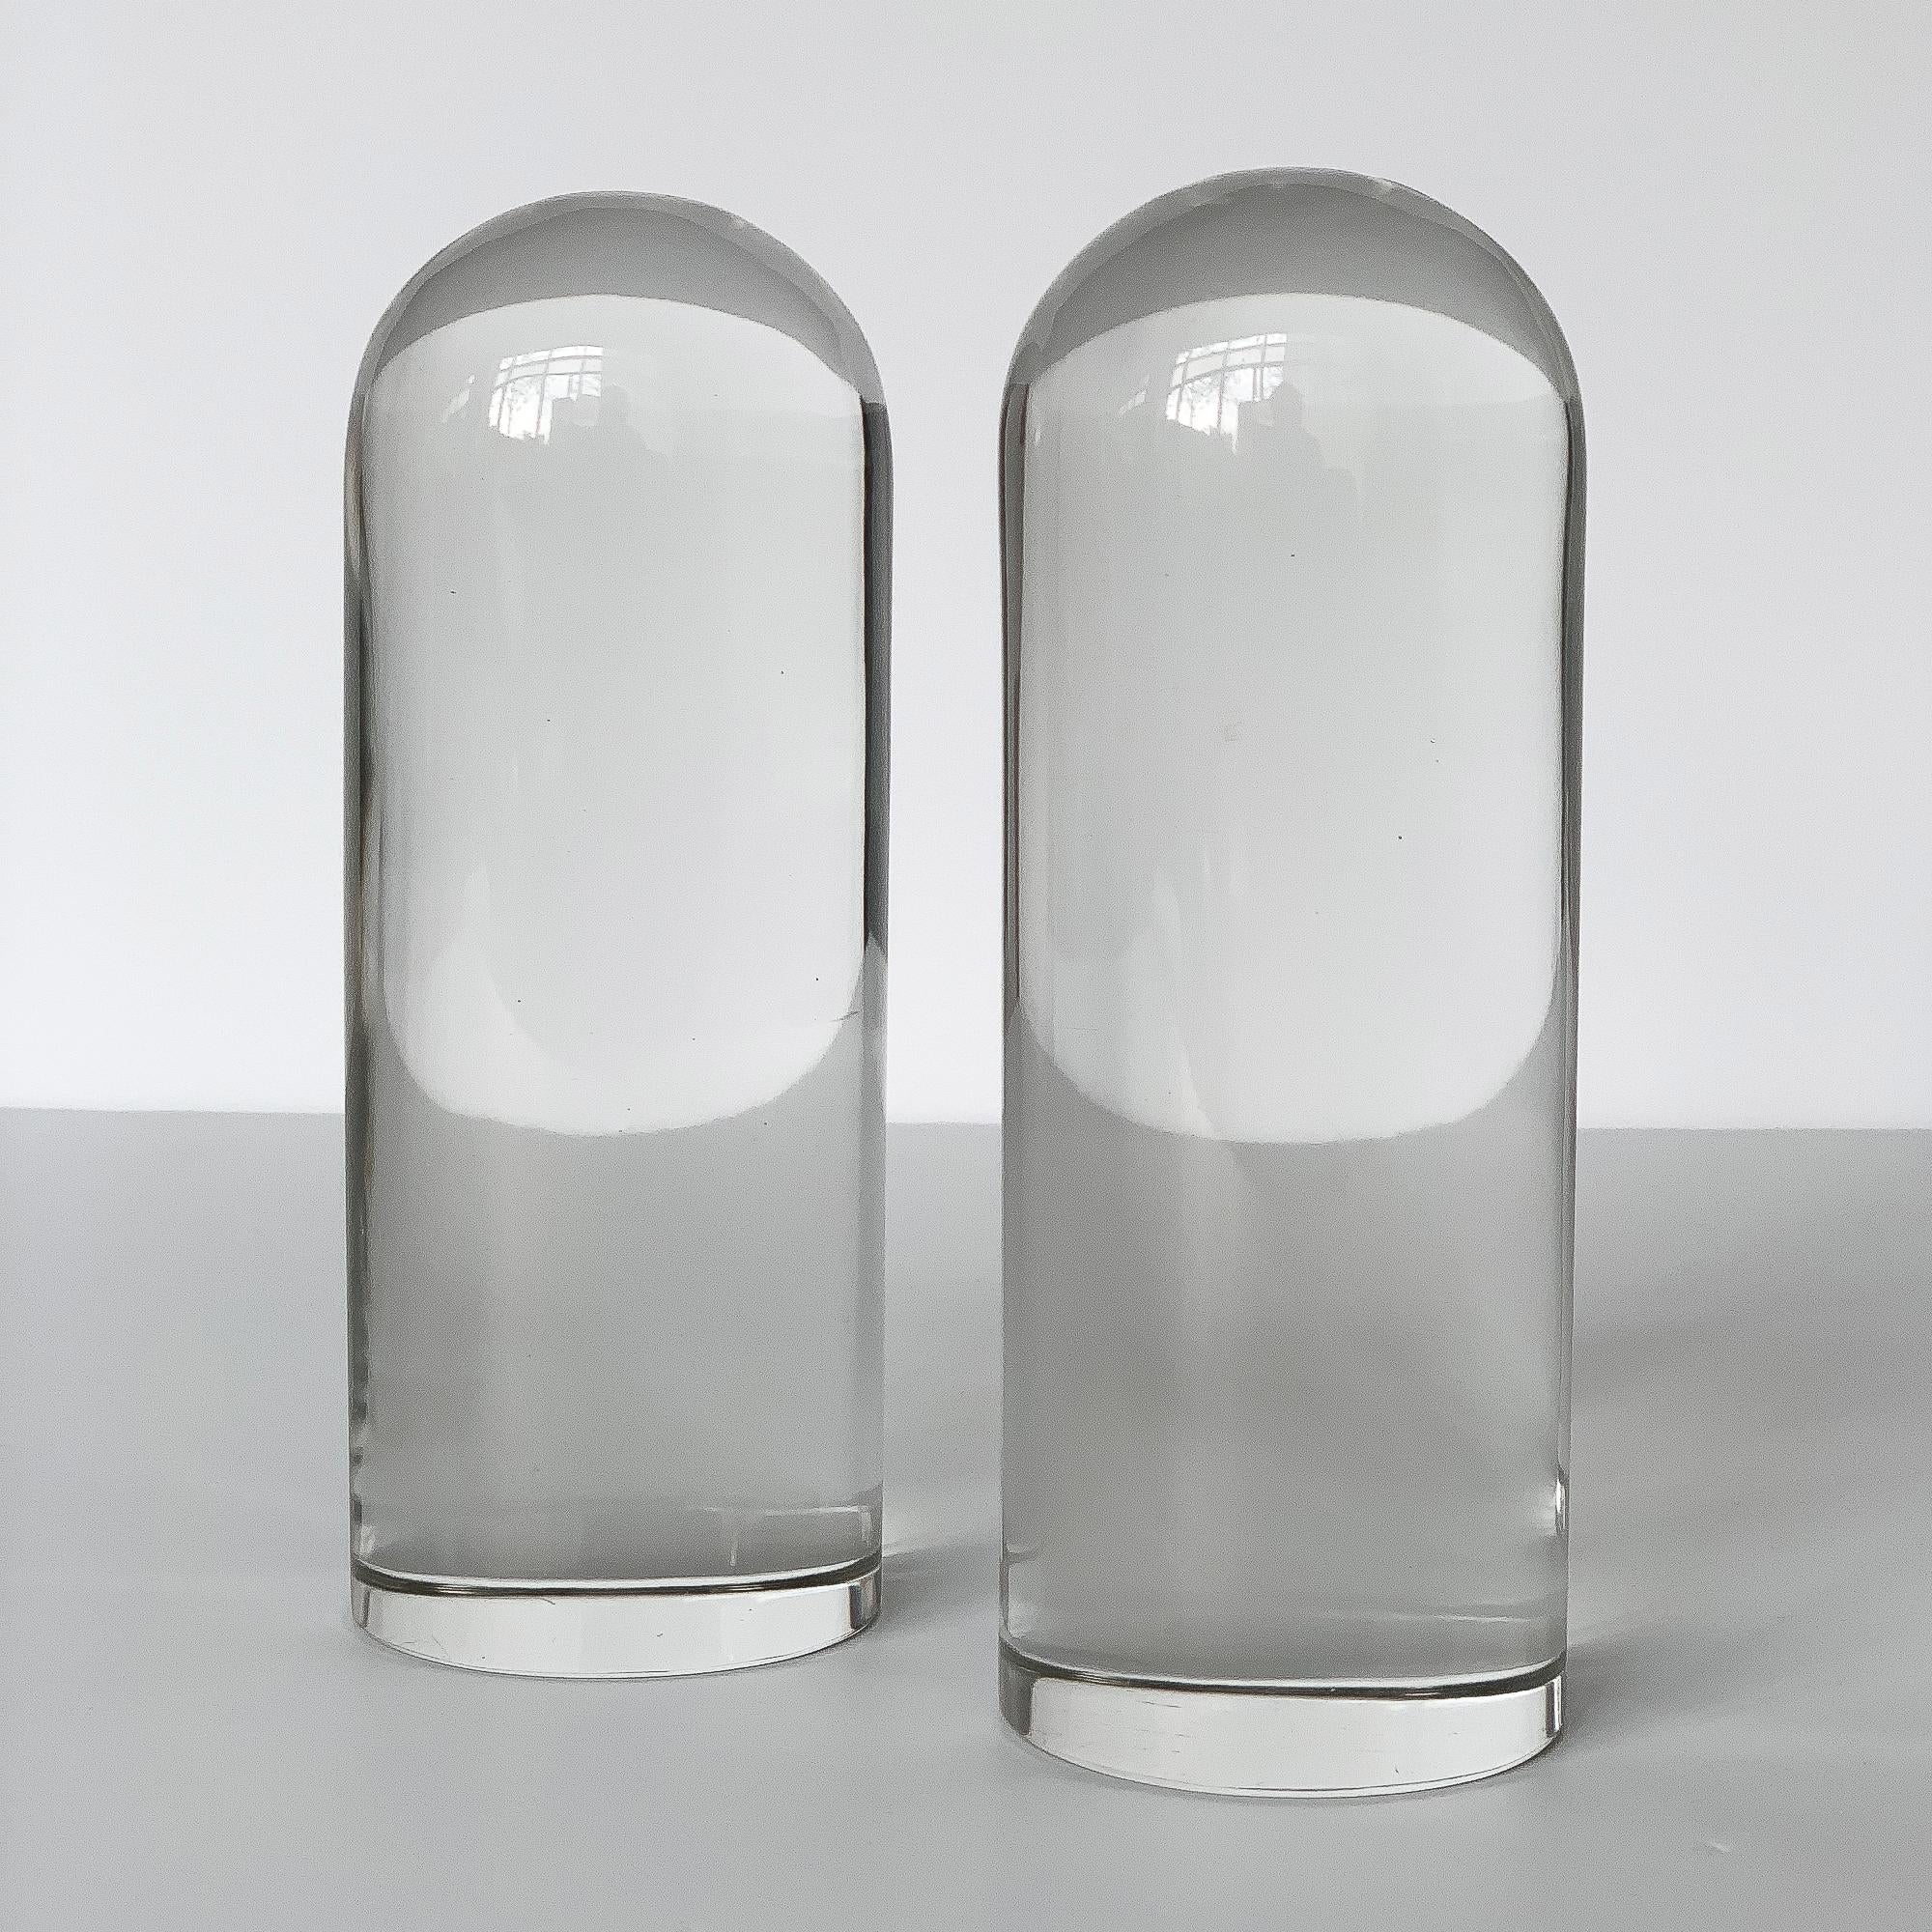 Pair of solid glass bullet shaped bookends or sculptural objects. 3